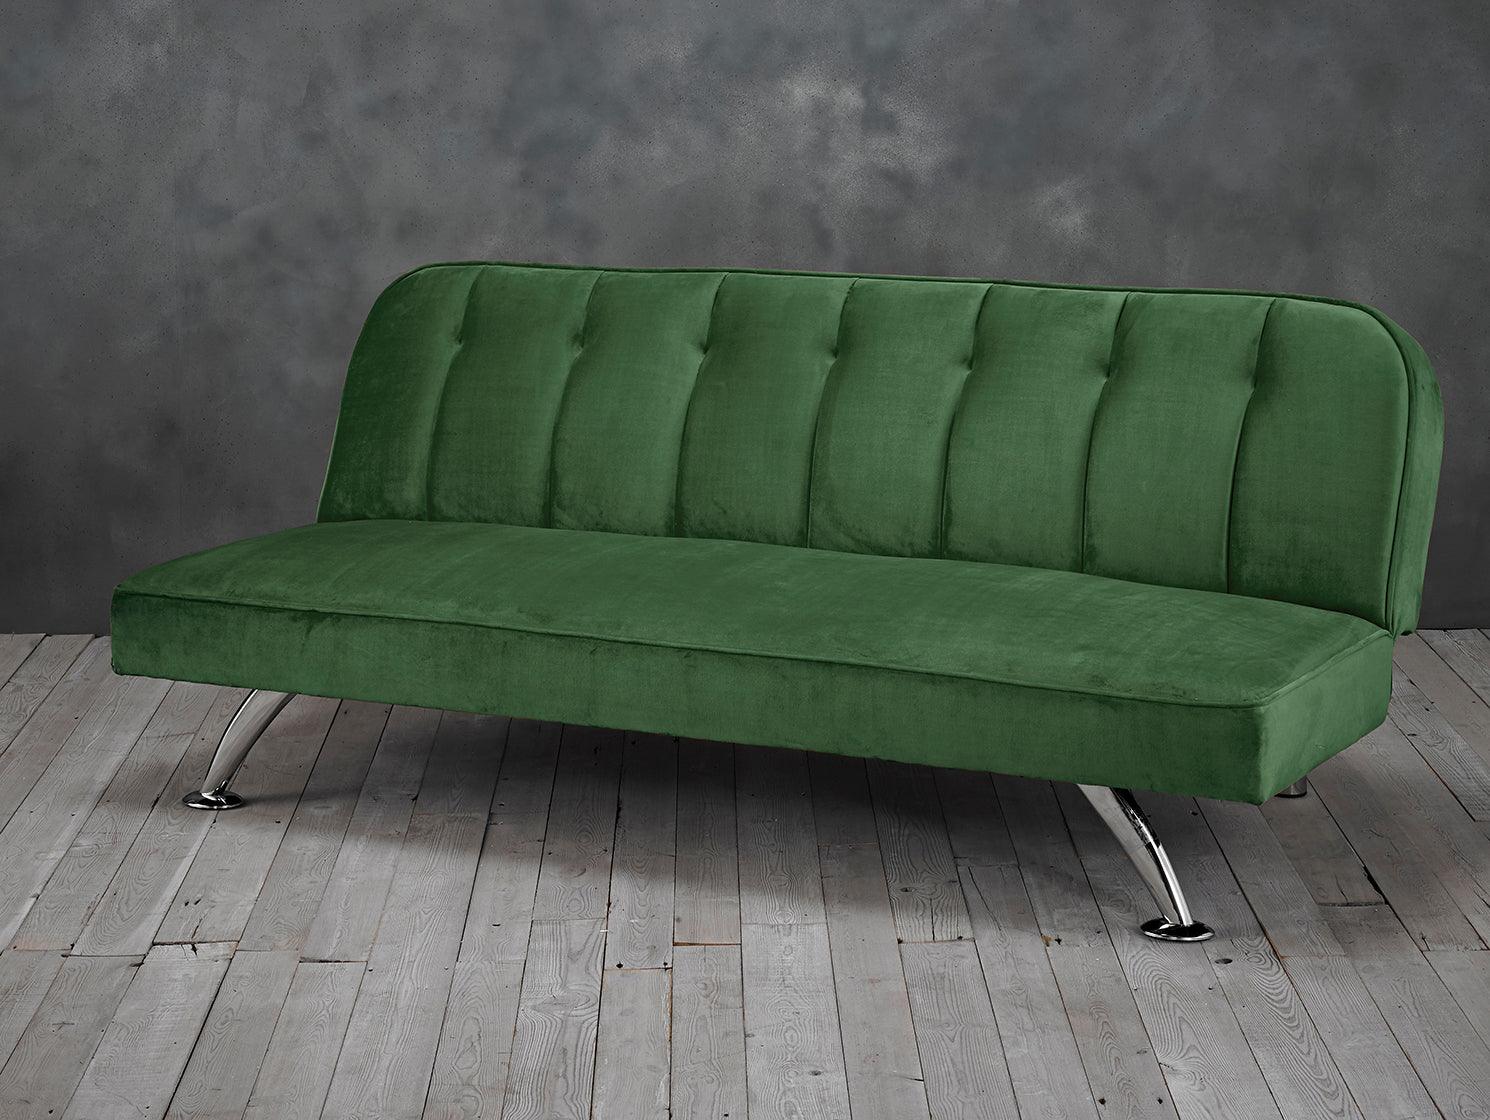 Brighton Sofa Bed Green - loveyourbed.co.uk